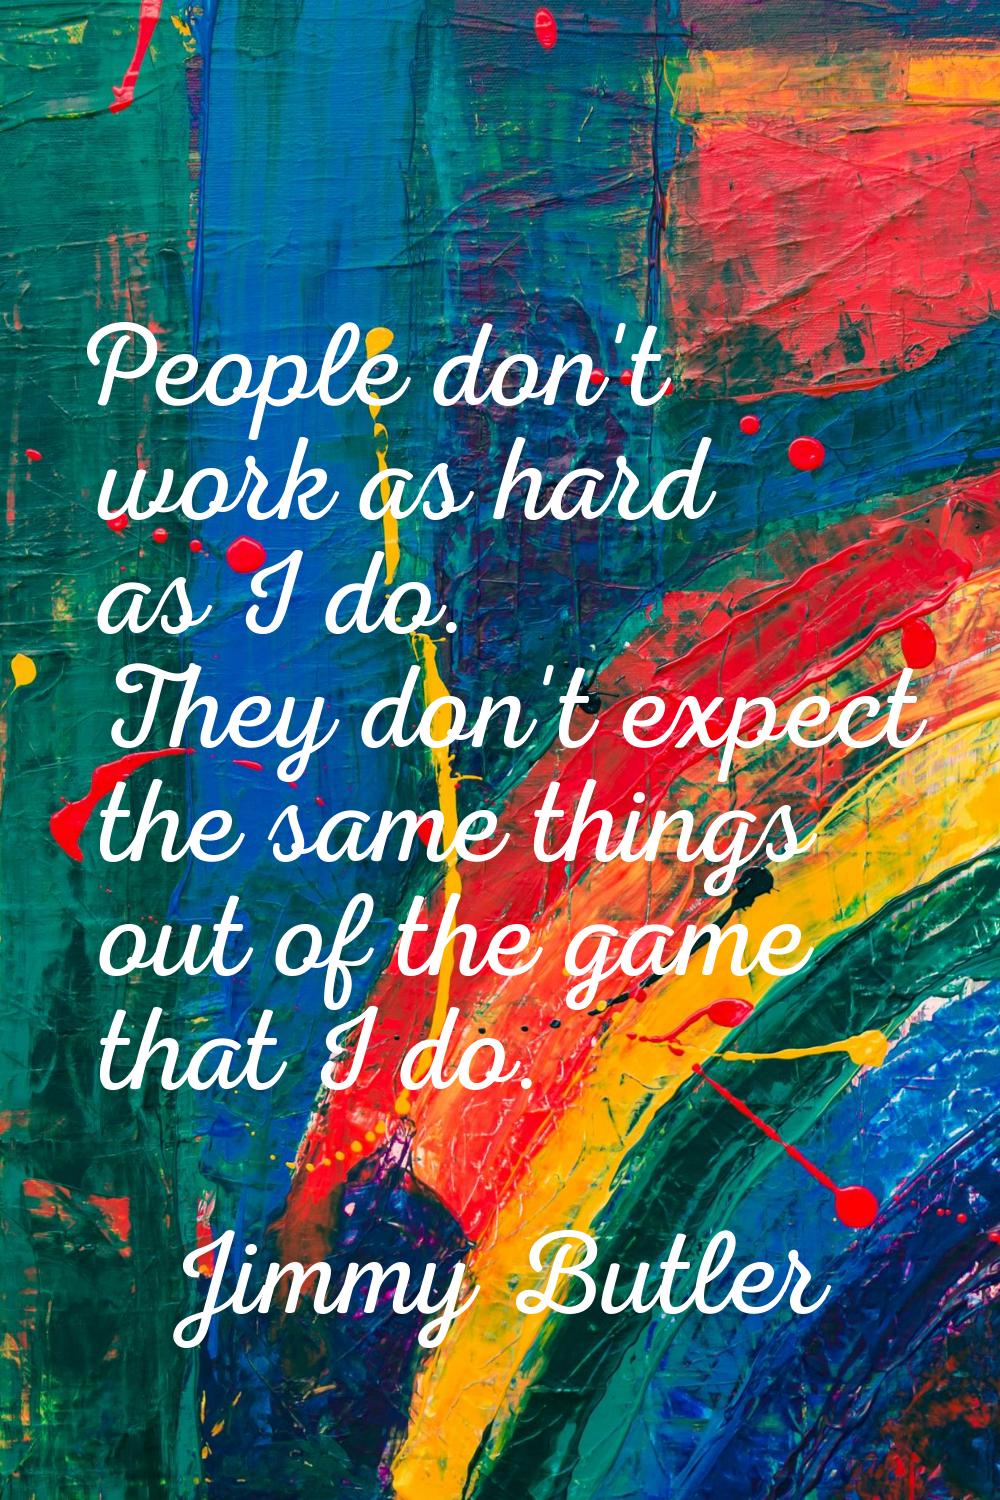 People don't work as hard as I do. They don't expect the same things out of the game that I do.